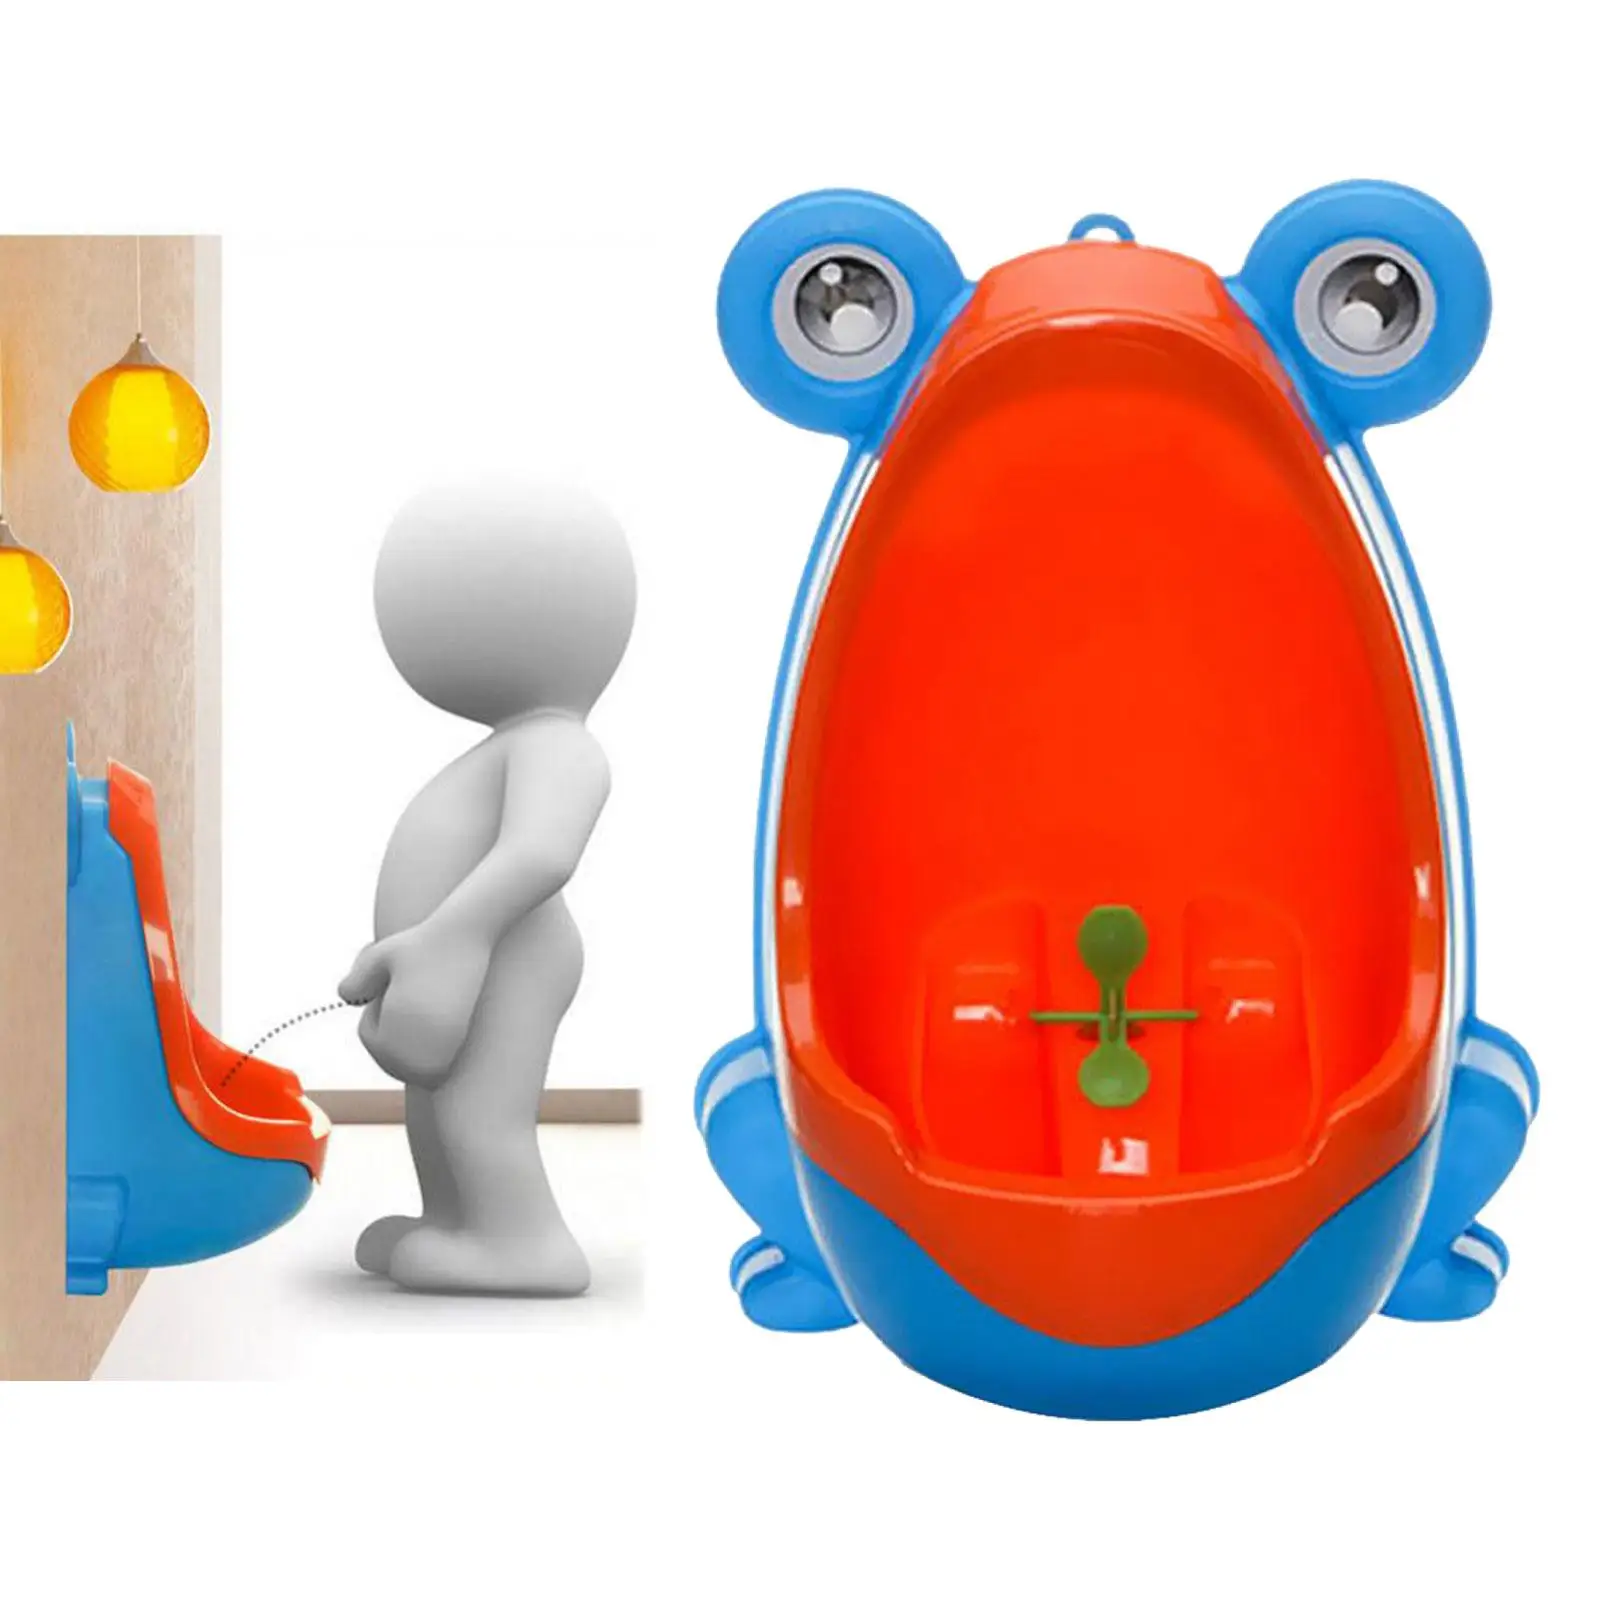 Boy Toilet Training Adjustable Height with Target Cartton Frog Potty Trainer Urinal for Indoor Outdoor Ages 2 and 6 Child